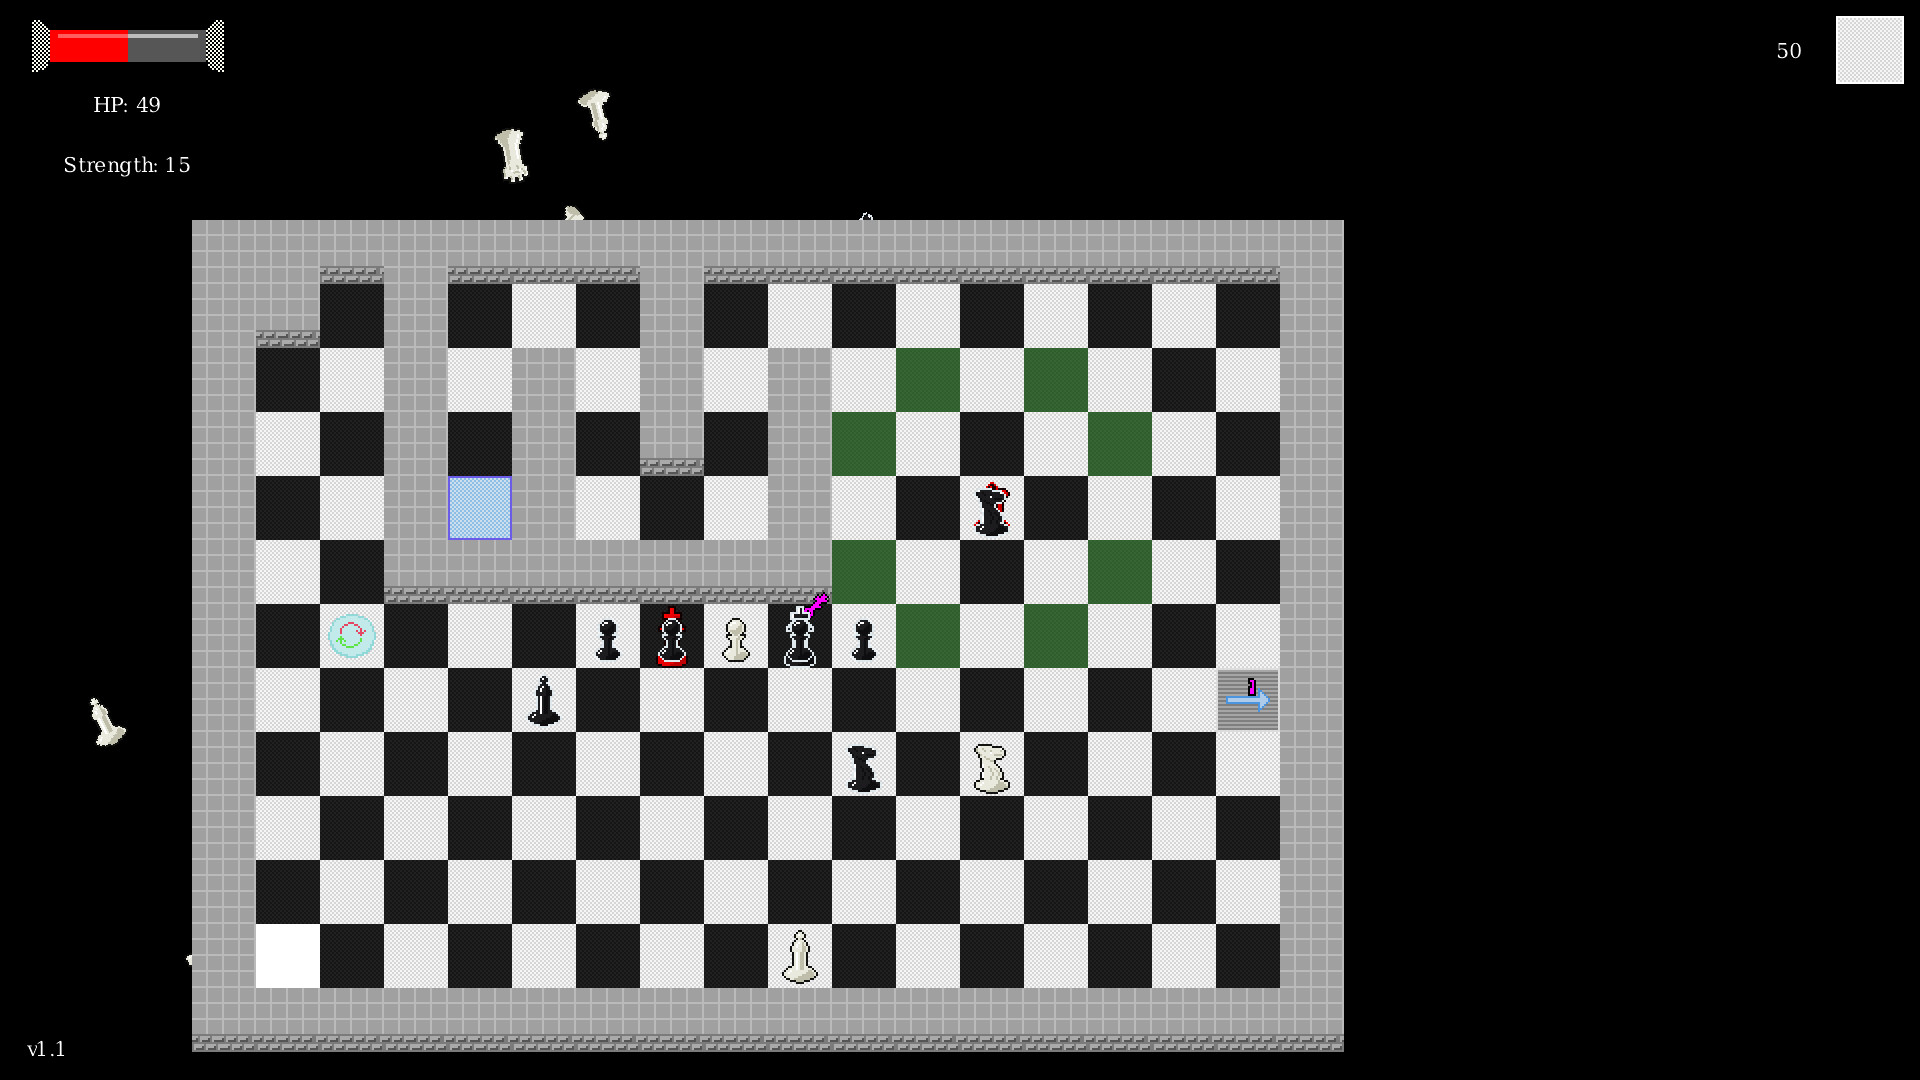 I tried to build chess in Terraia! White has mate in 2! : Terraria